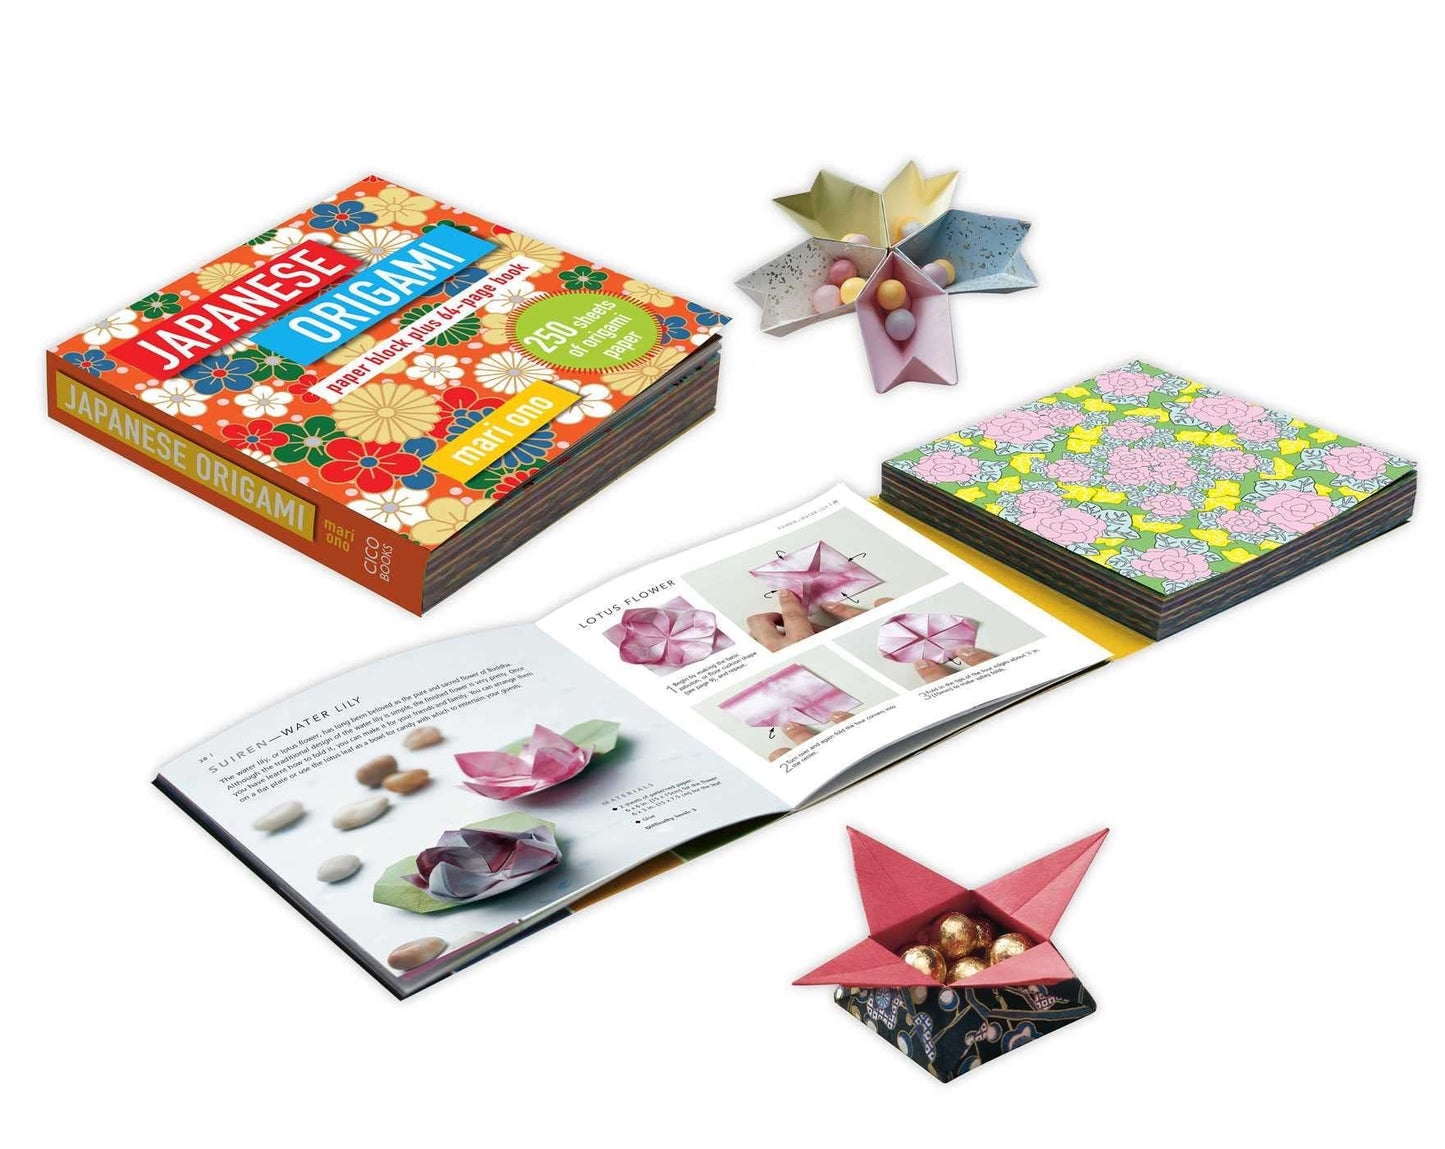 Japanese Origami Paper Block plus Project Book open